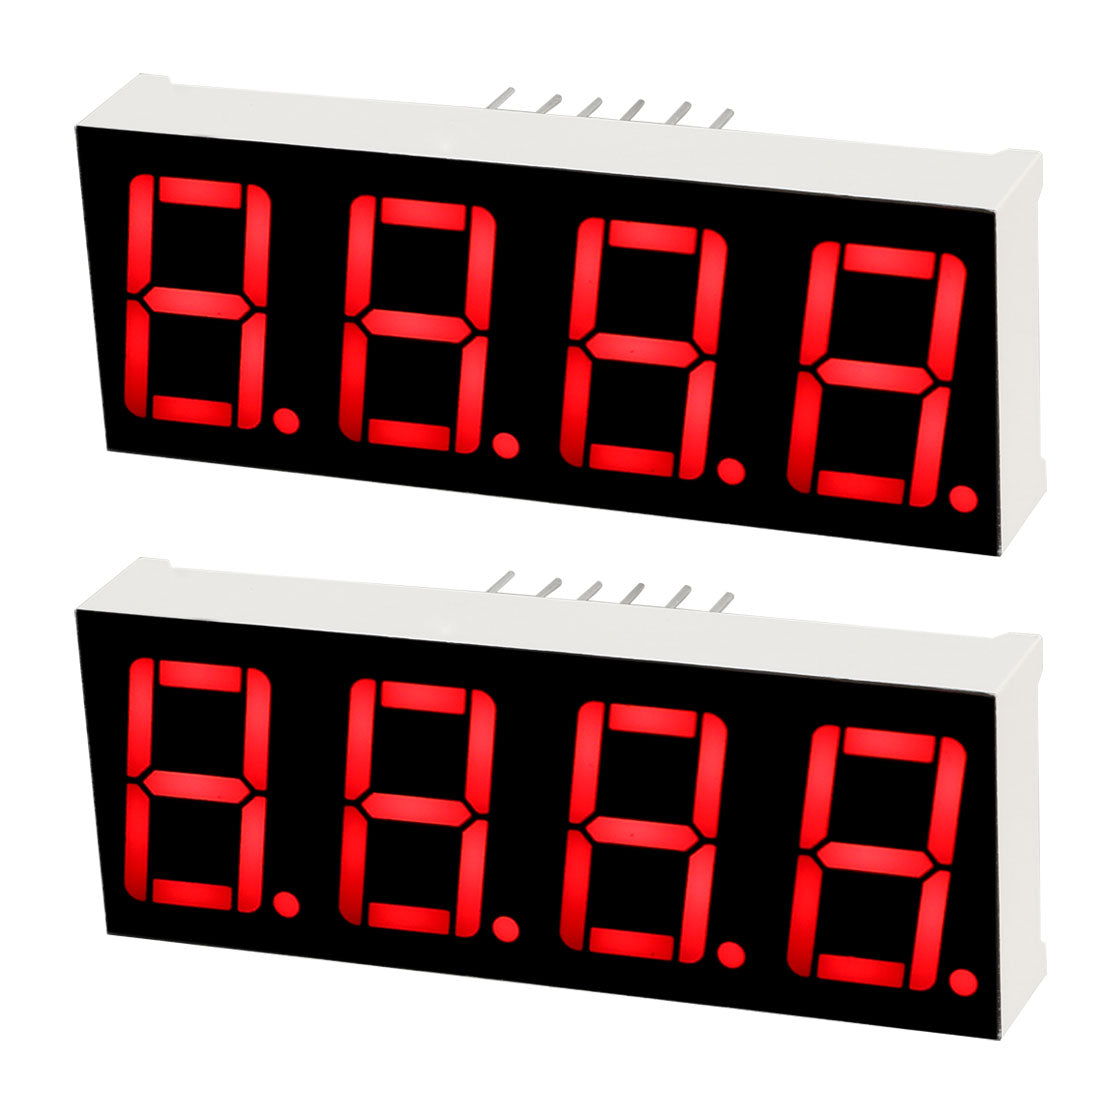 Uxcell Uxcell Common Cathode 12Pin 4 Bit 7 Segment 1.98 x 0.75 x 0.31 Inch 0.55" Red LED Display Digital Tube 5pcs